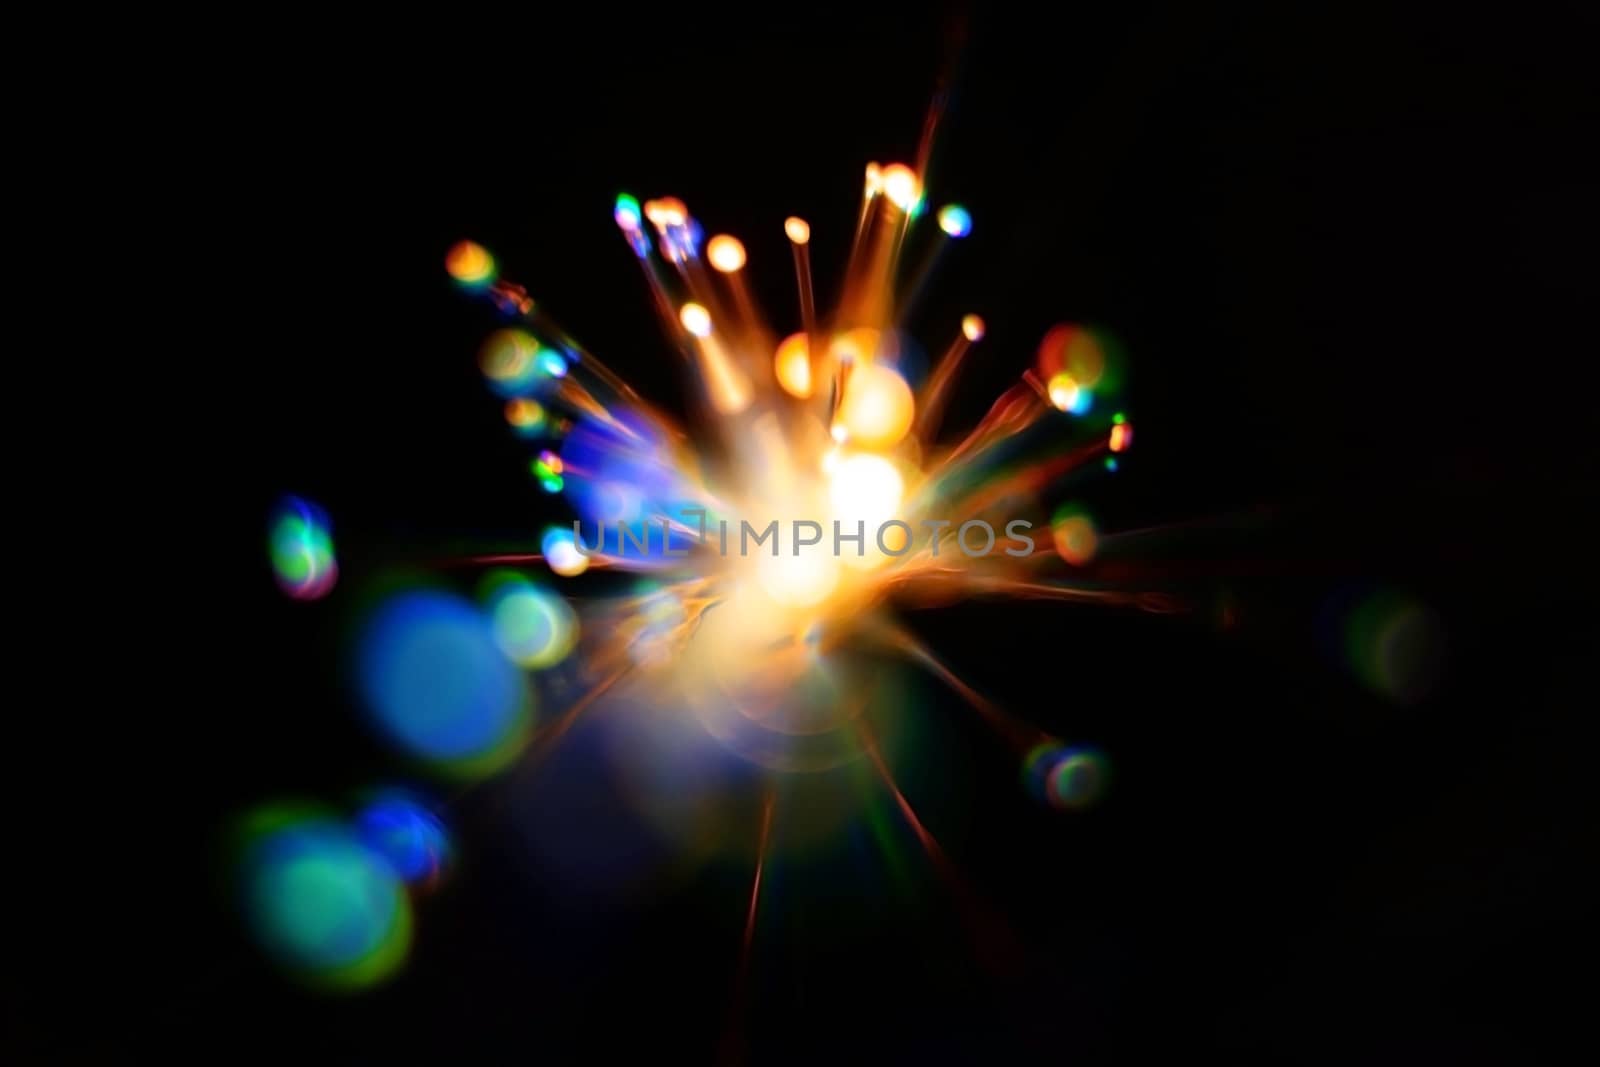 Light explosion background by daboost